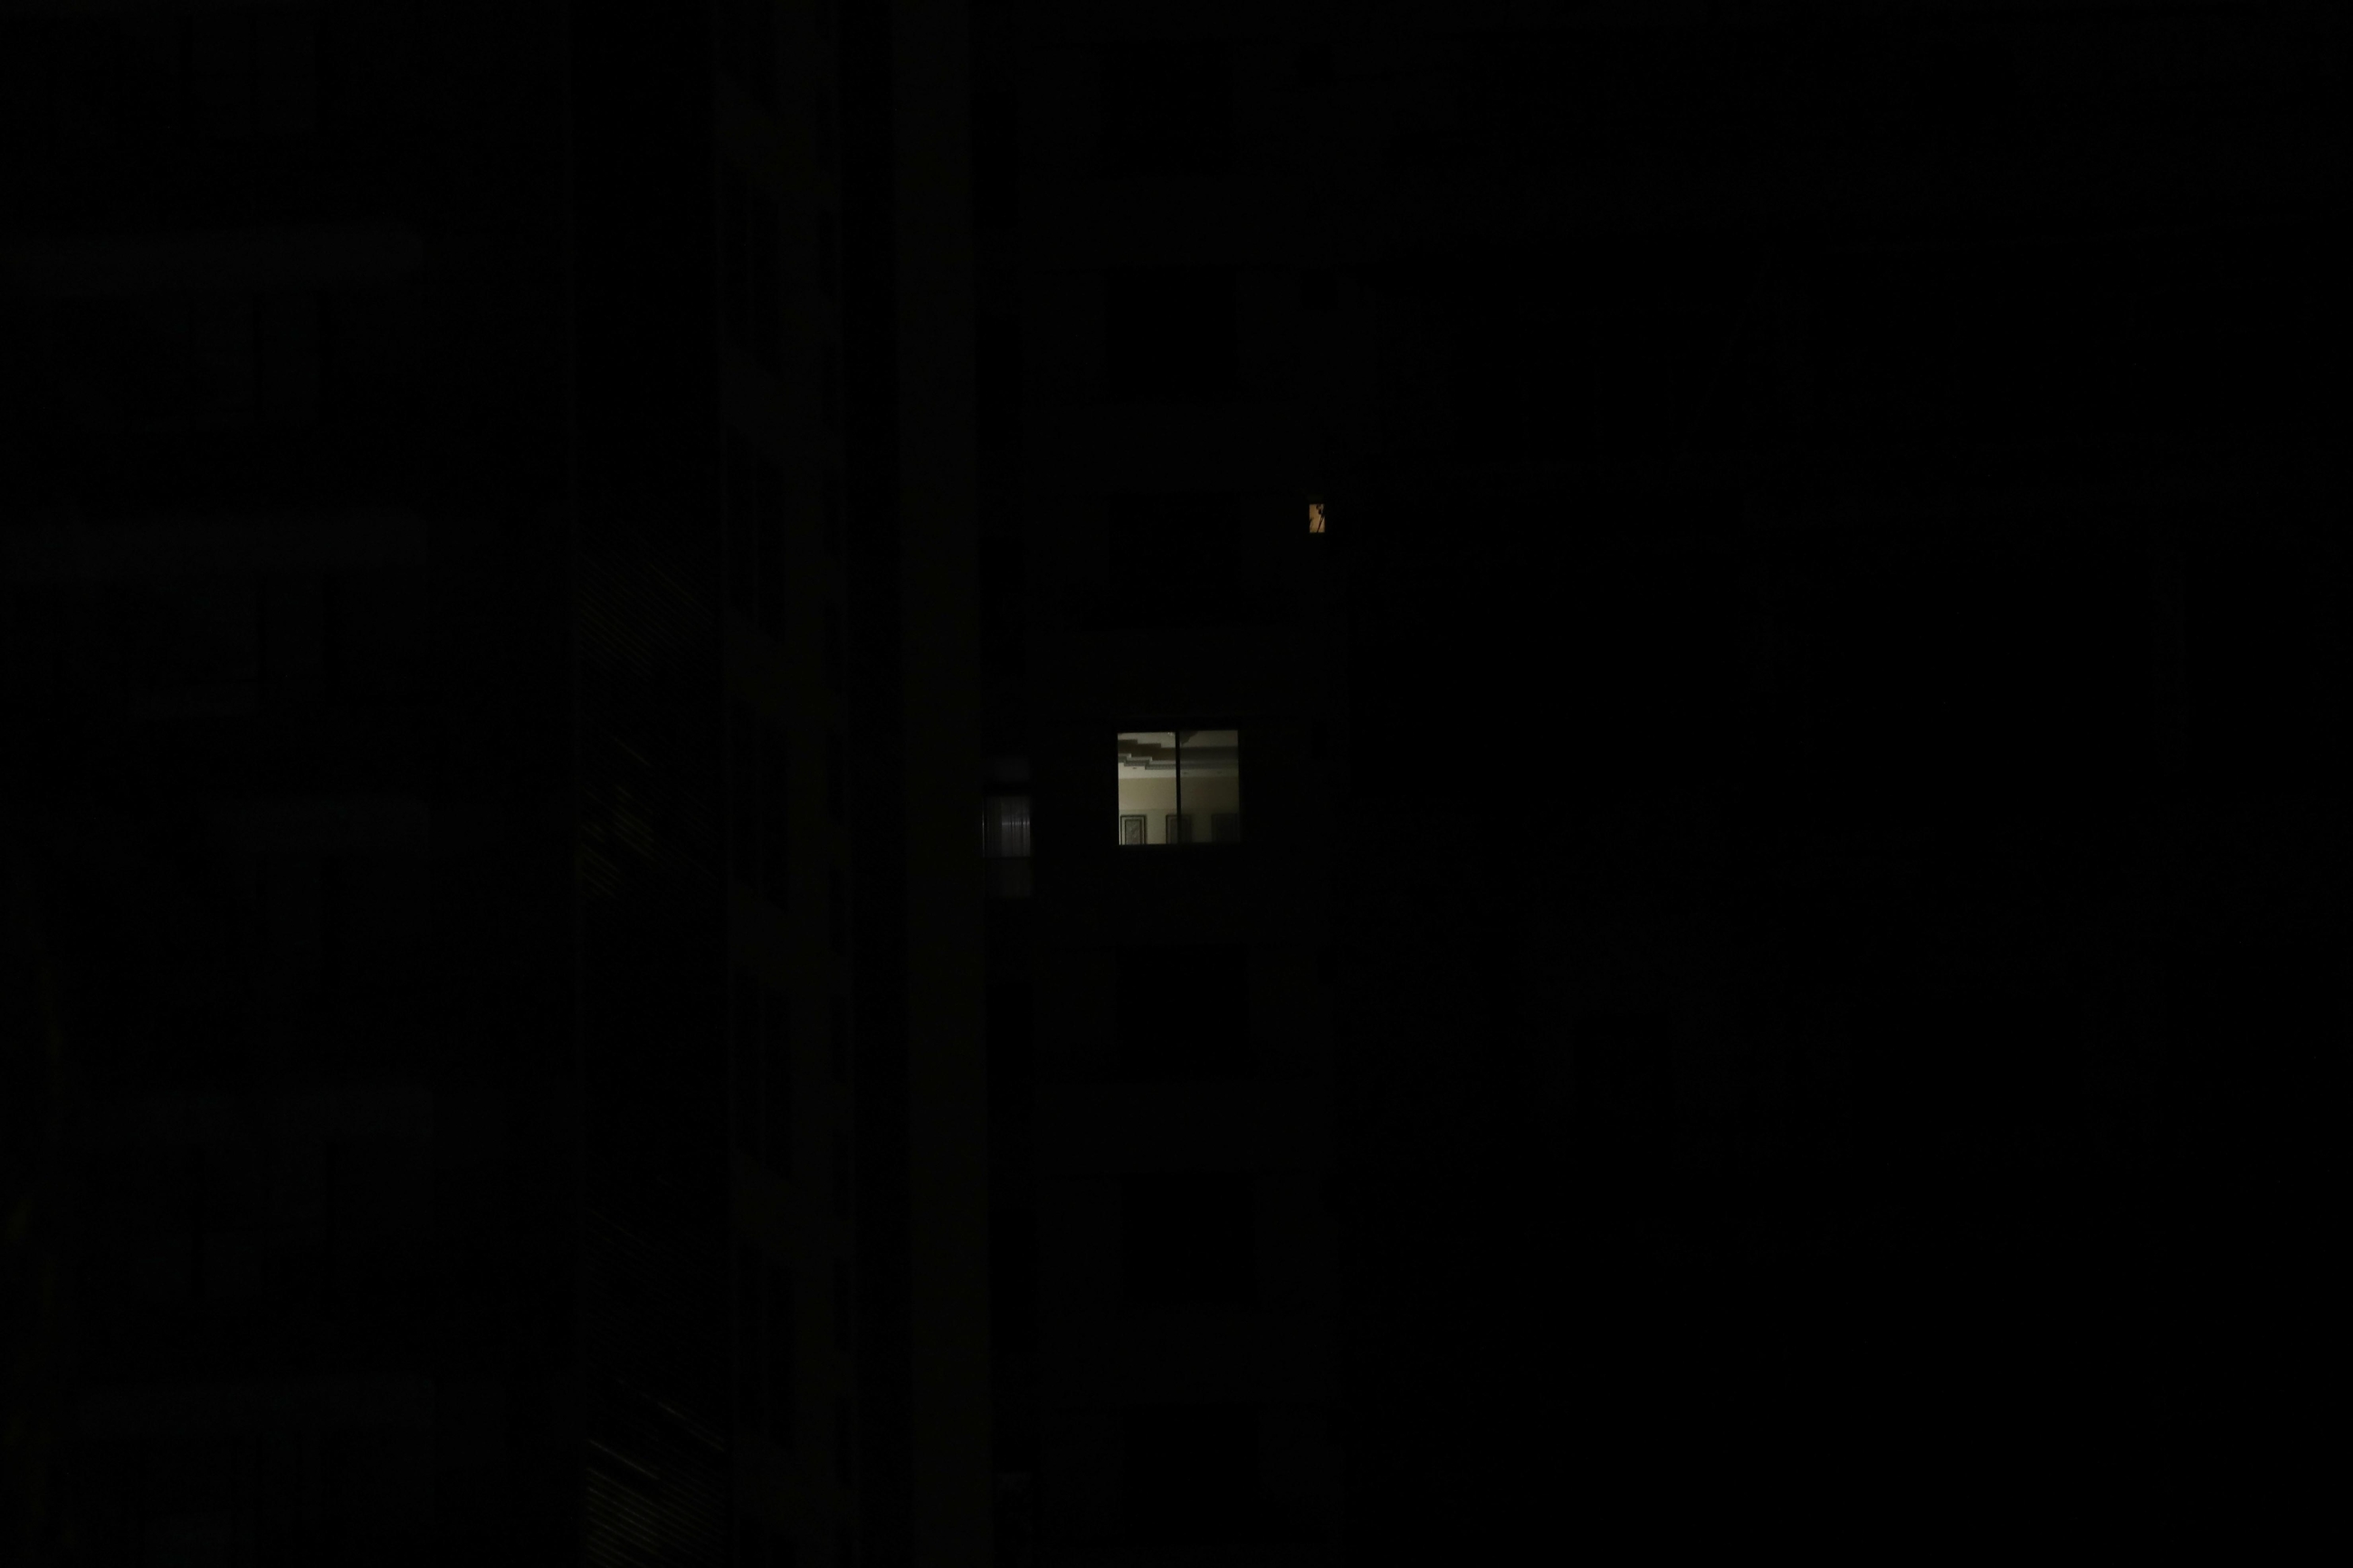 Beirut in darkness; a lit up window. Beirut, Lebanon. August 28, 2020. (Marwan Tahtah/The Public Source)